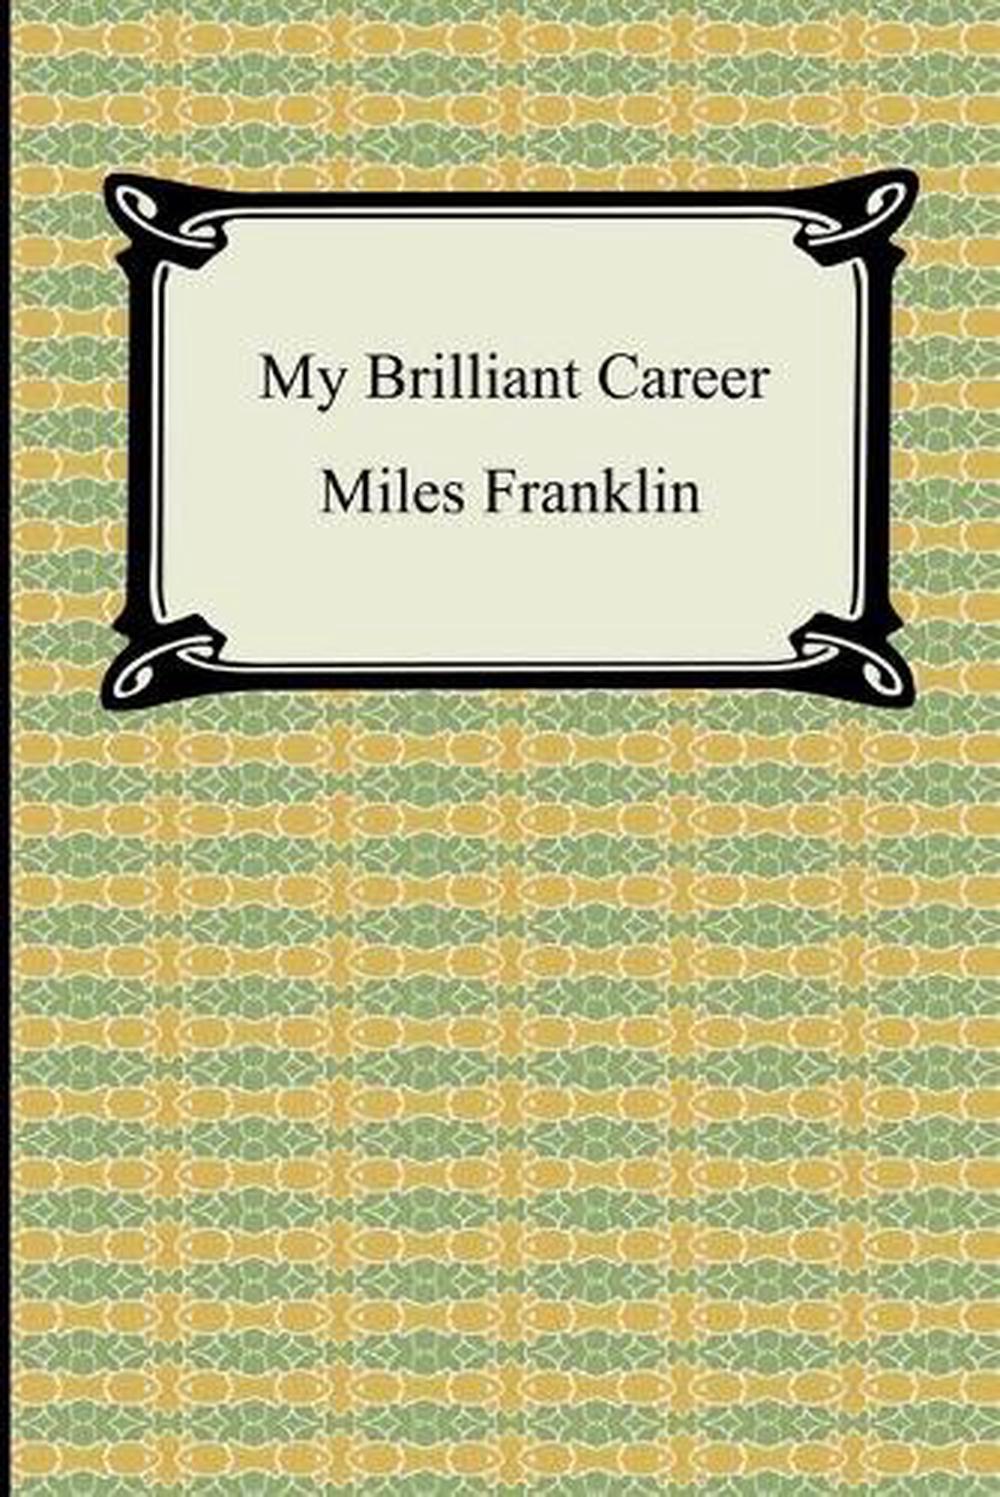 my brilliant career by miles franklin